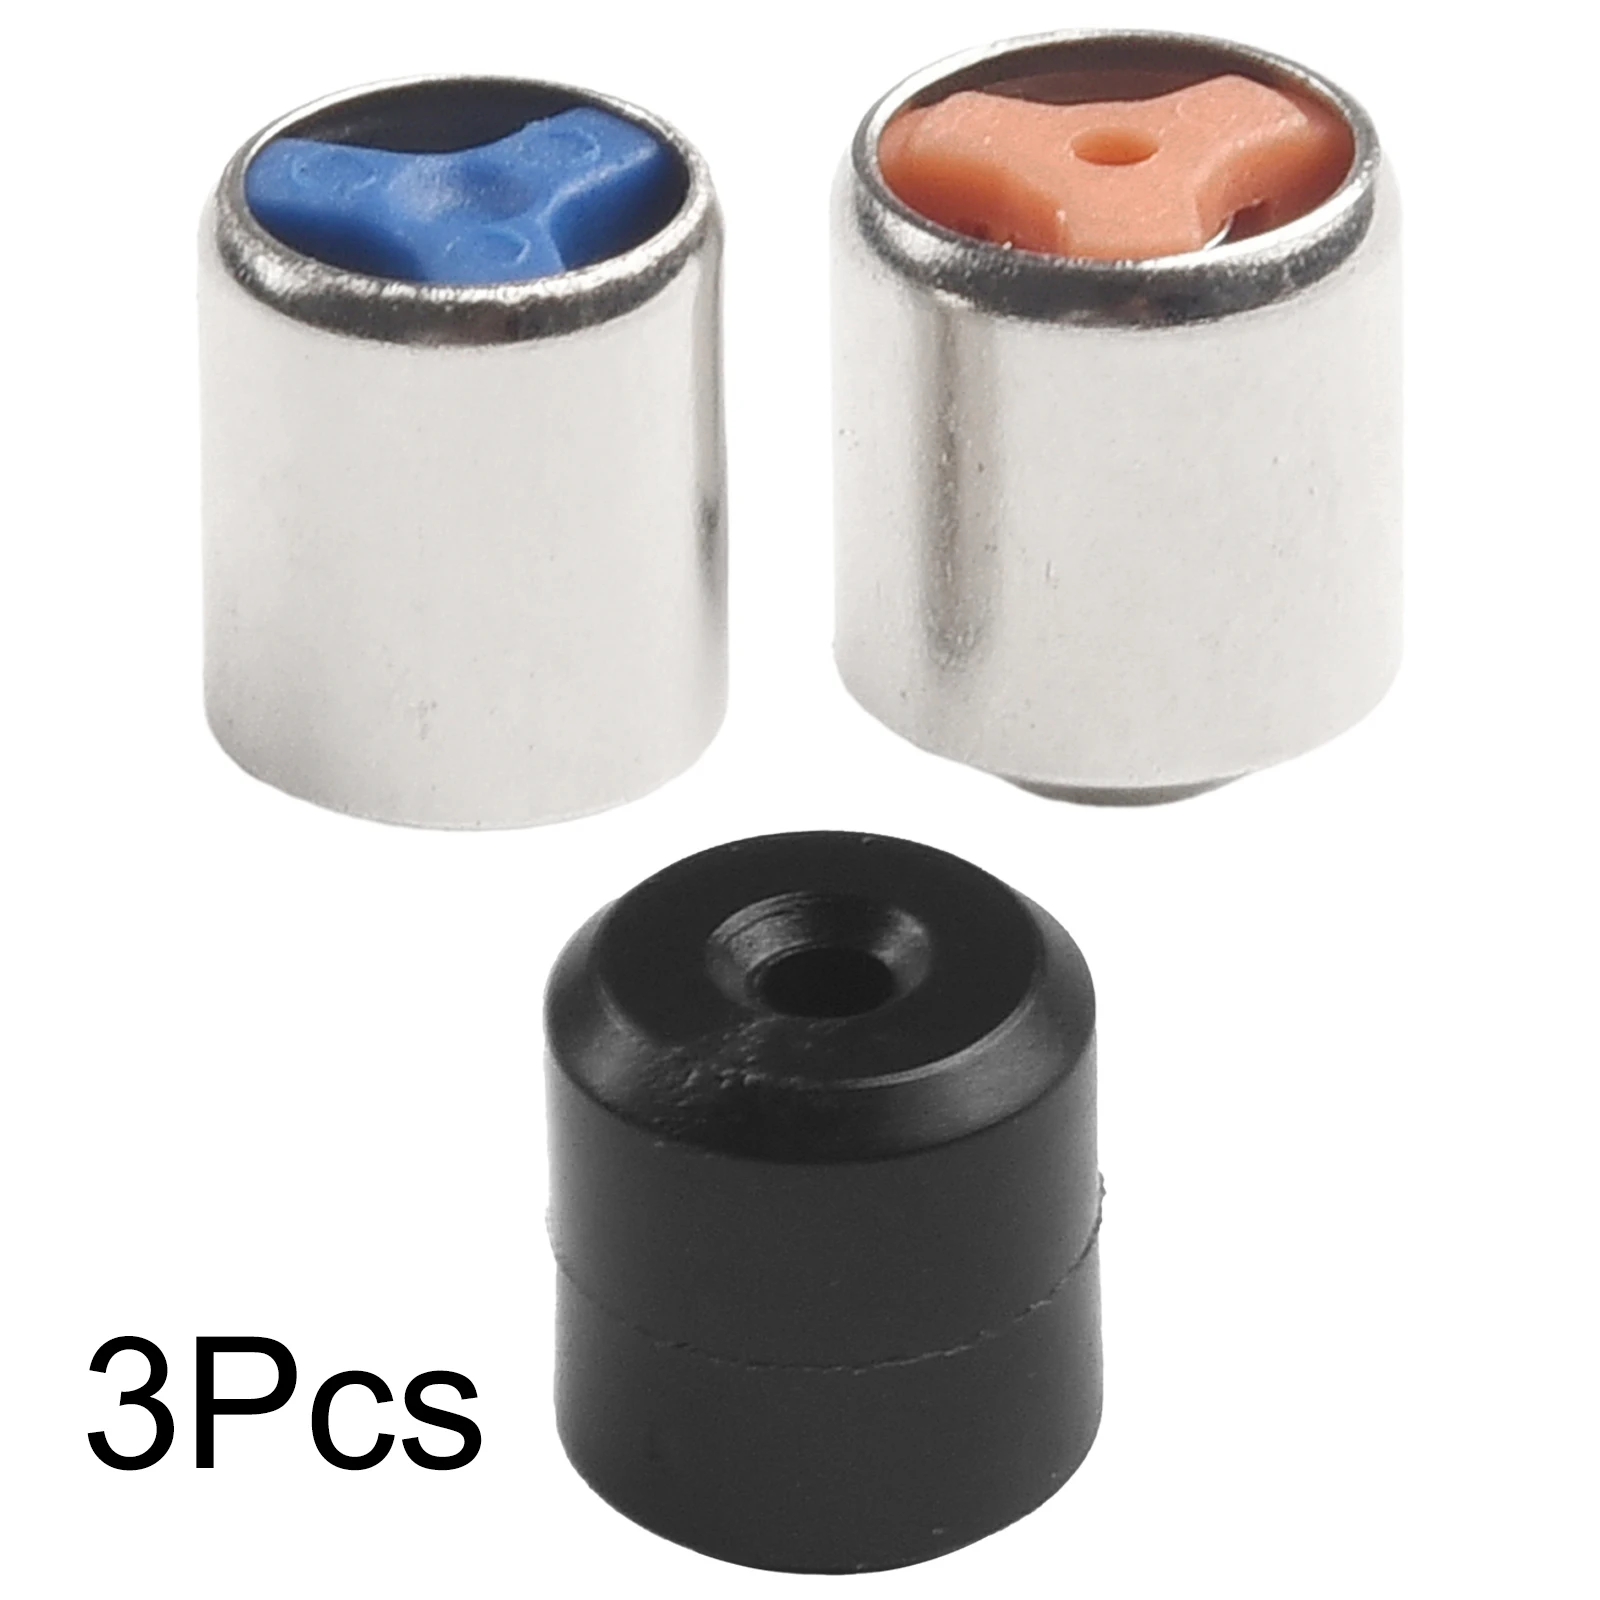 

3PCS Restrictor Valve Check Oil Flow For Chevrolet For Sonic For Trax For Cruze For Aveo5 1.4L/1.6L 55556227/90530050/55563957